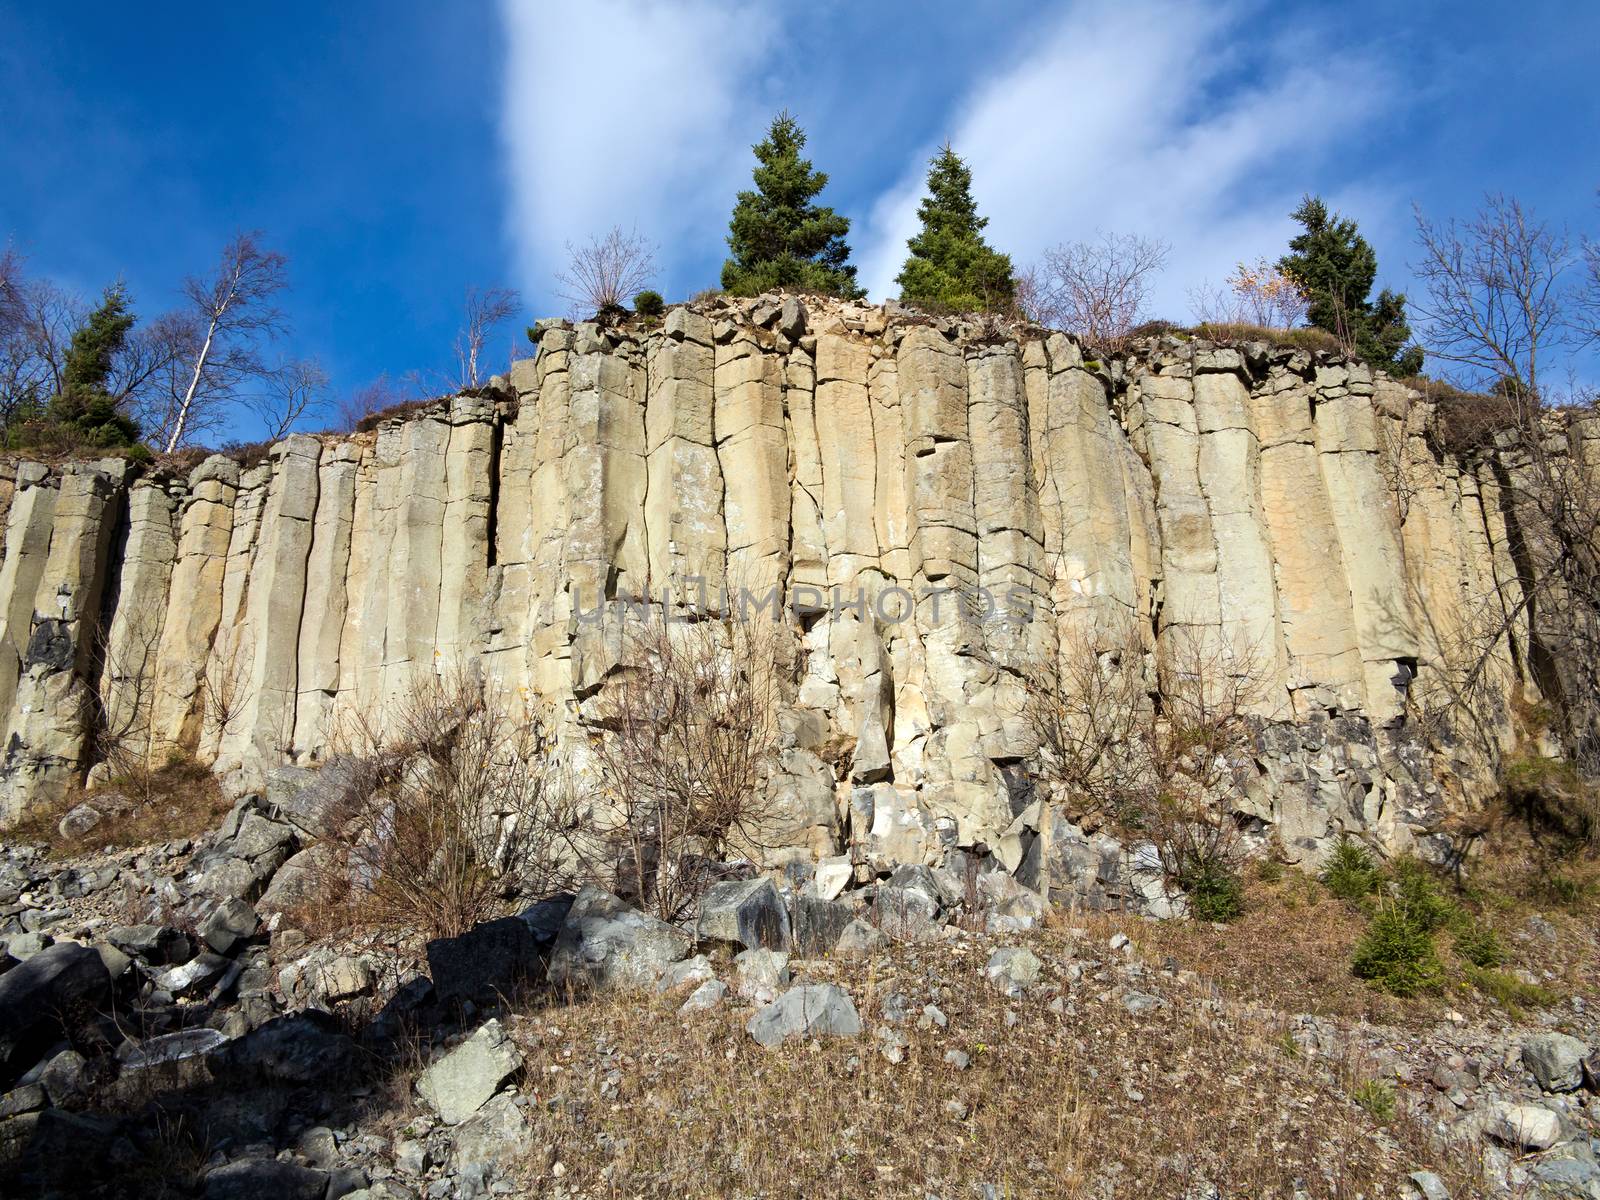 Old Basalt Quarry In The Ore Mountains - basalt columnar jointin by Mibuch